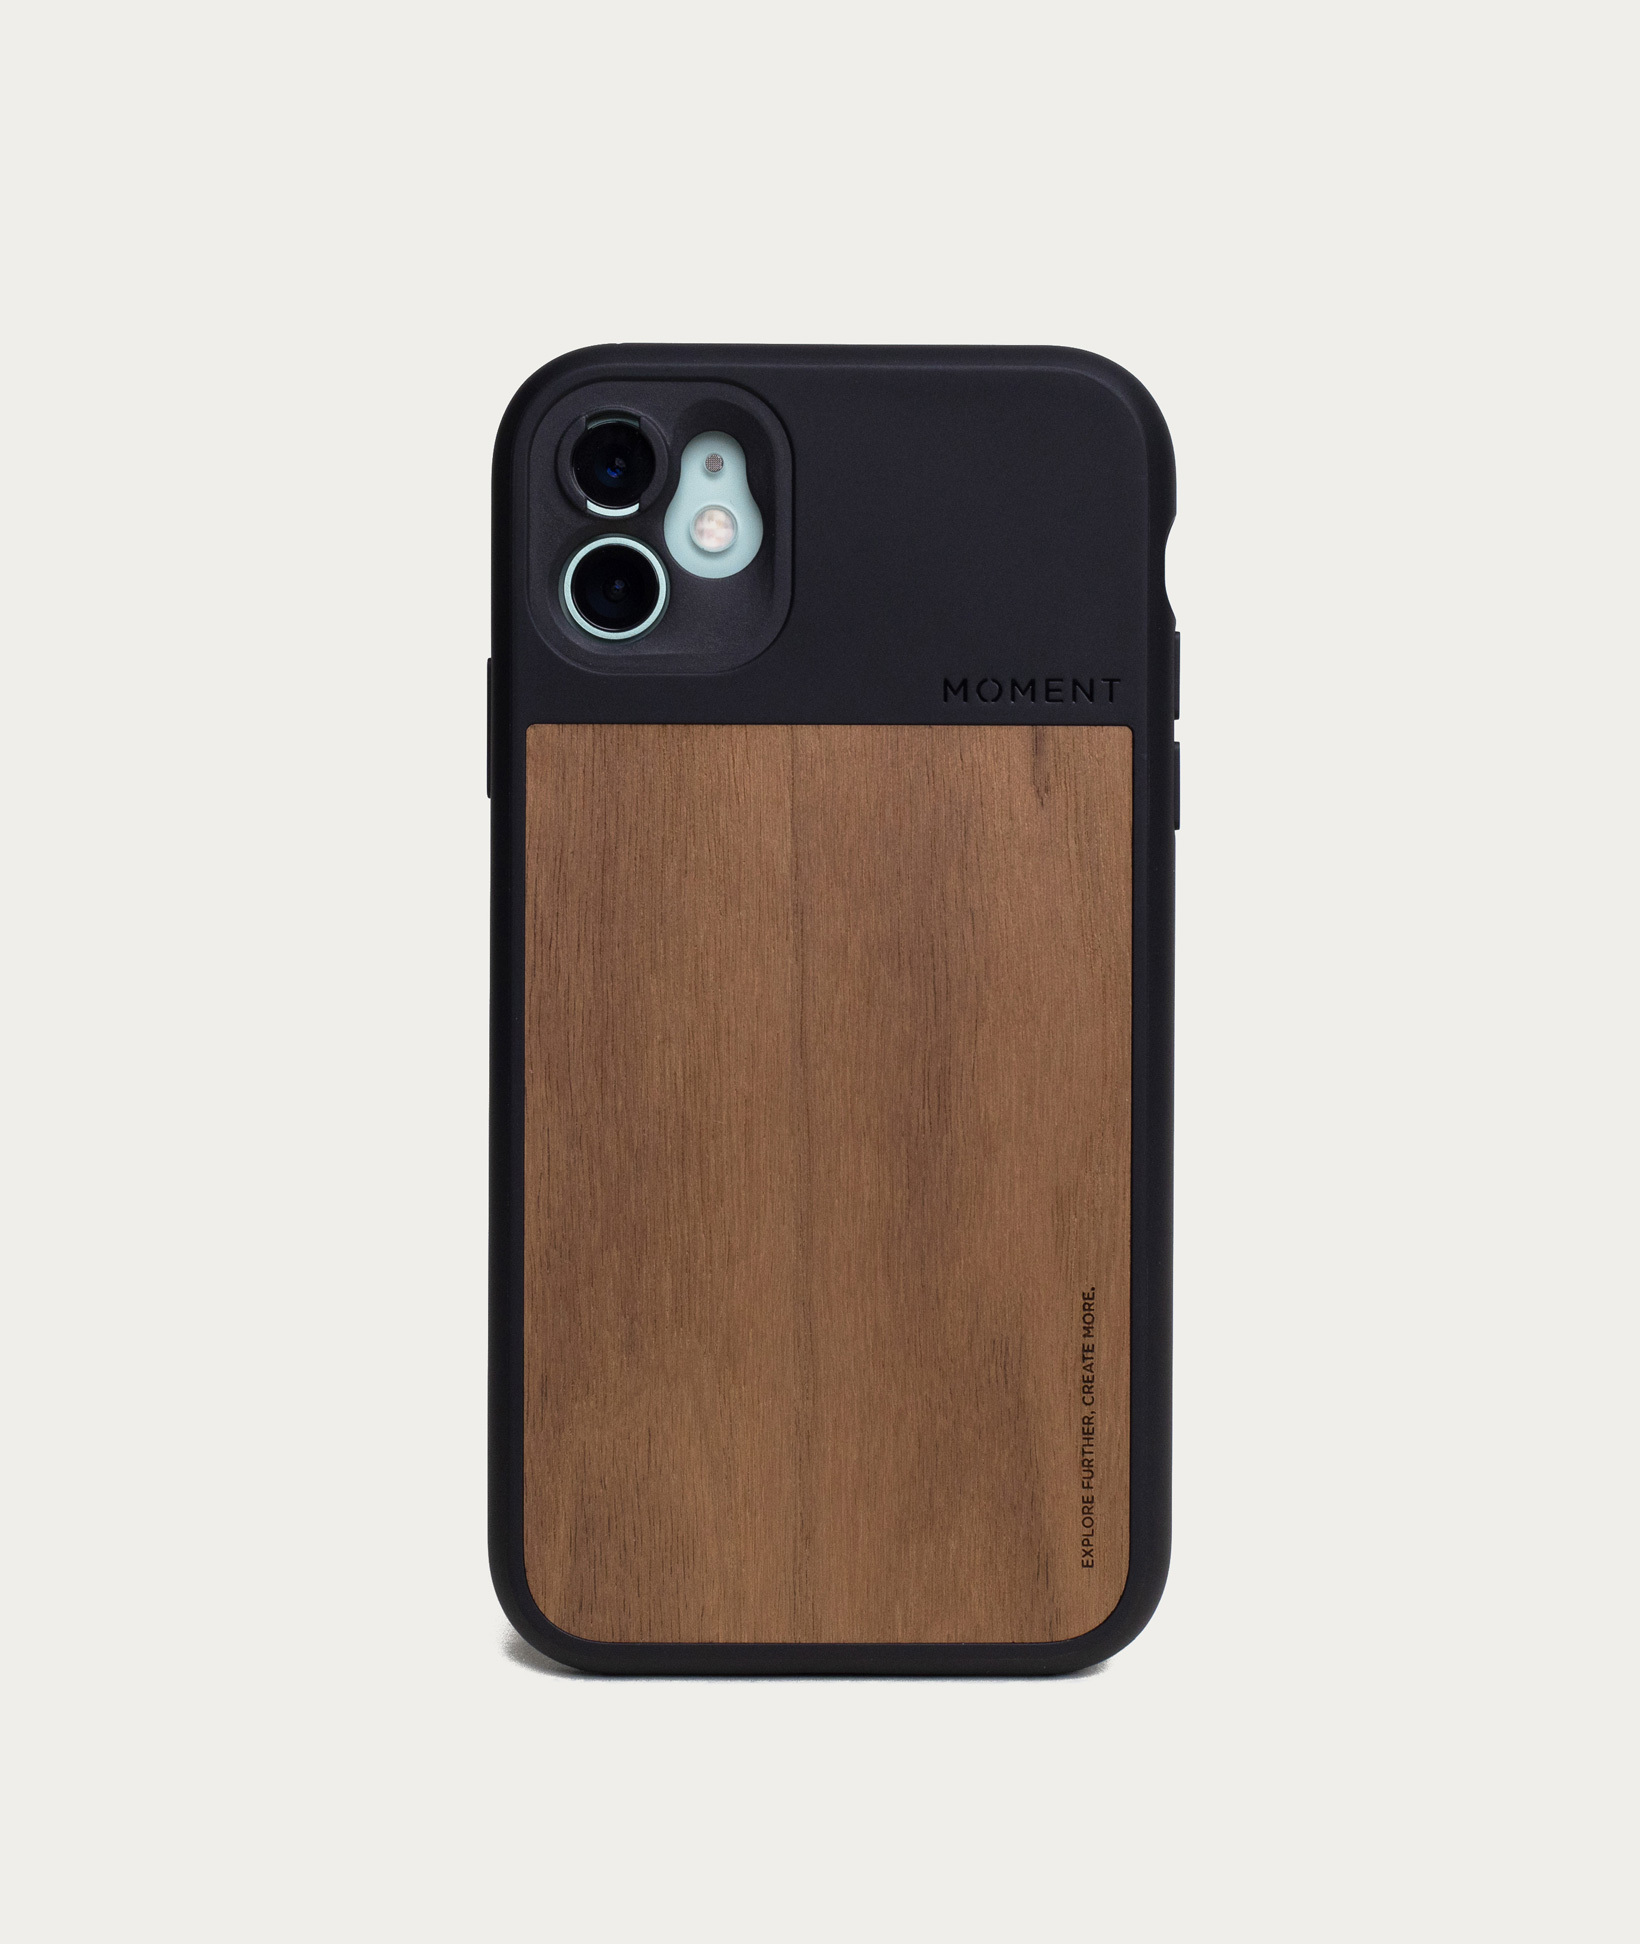 Moment Rugged Case for iPhone 11 with (M)Force - Walnut Wood…